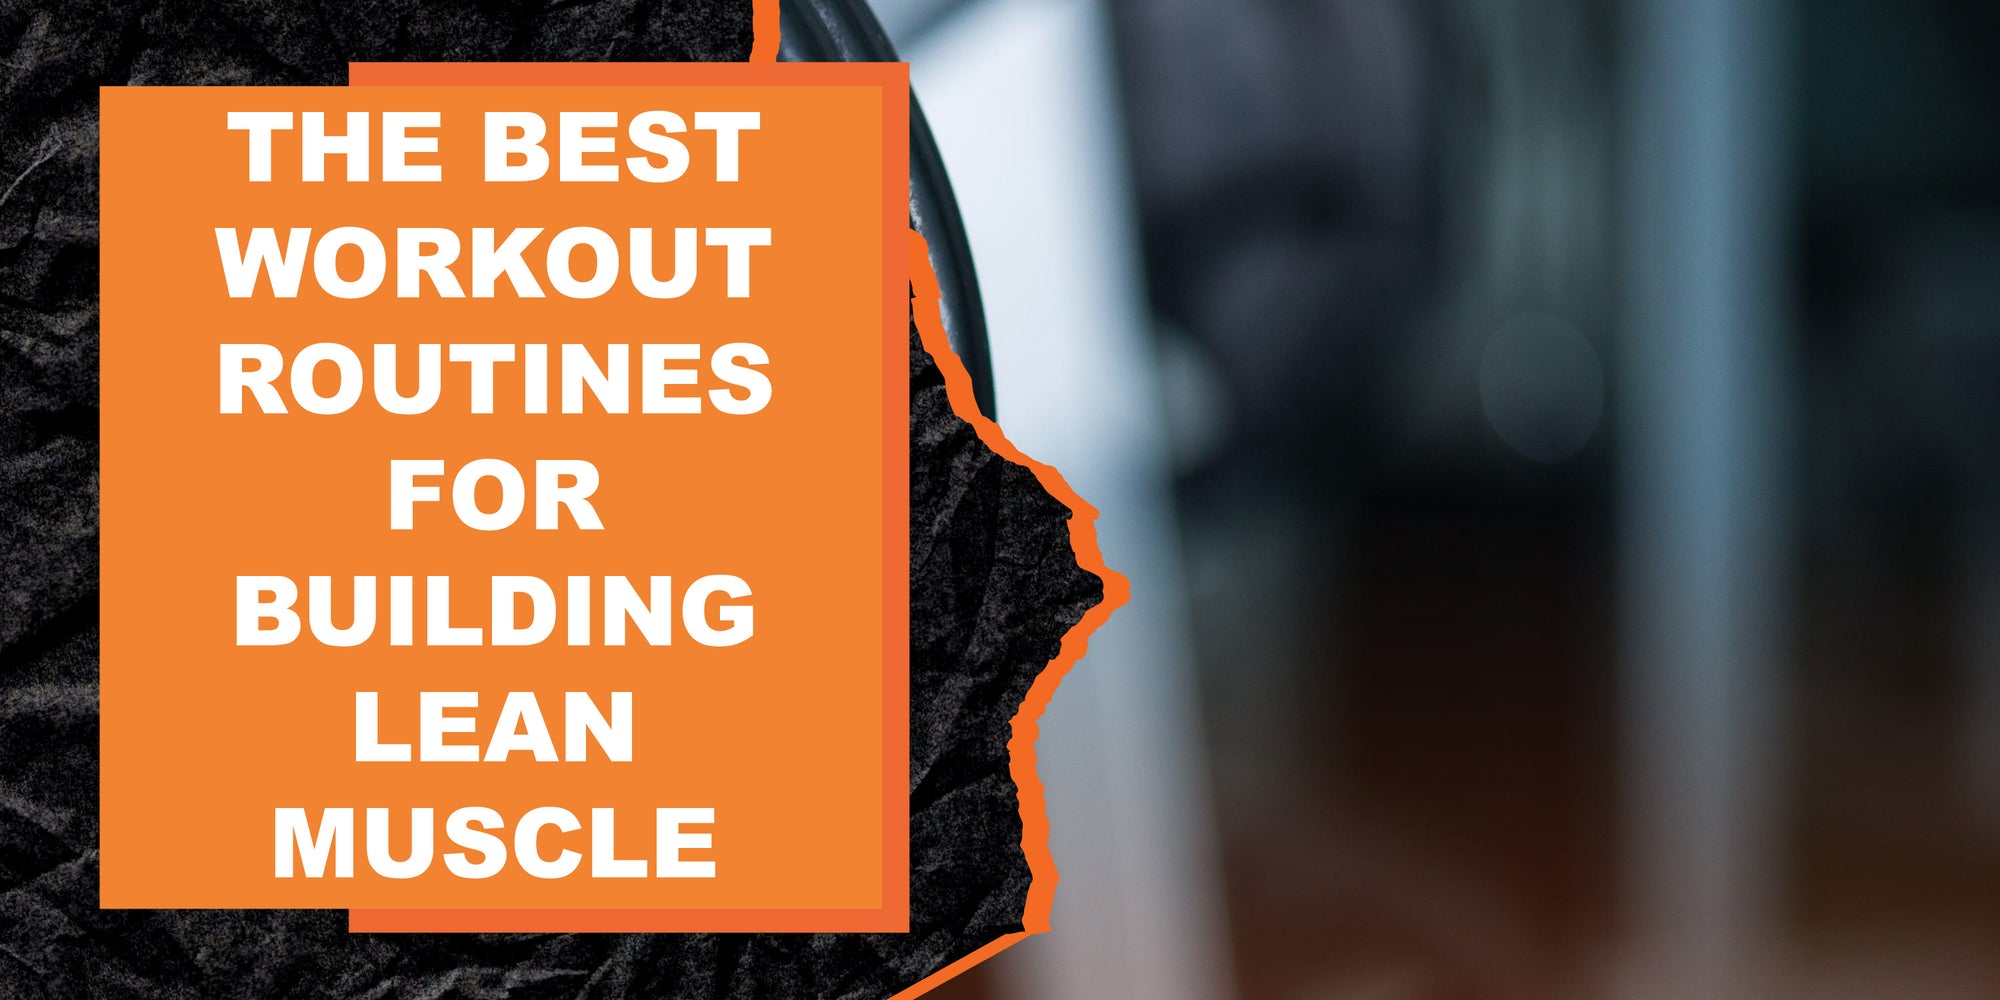 The Best Workout Routines for Building Lean Muscle